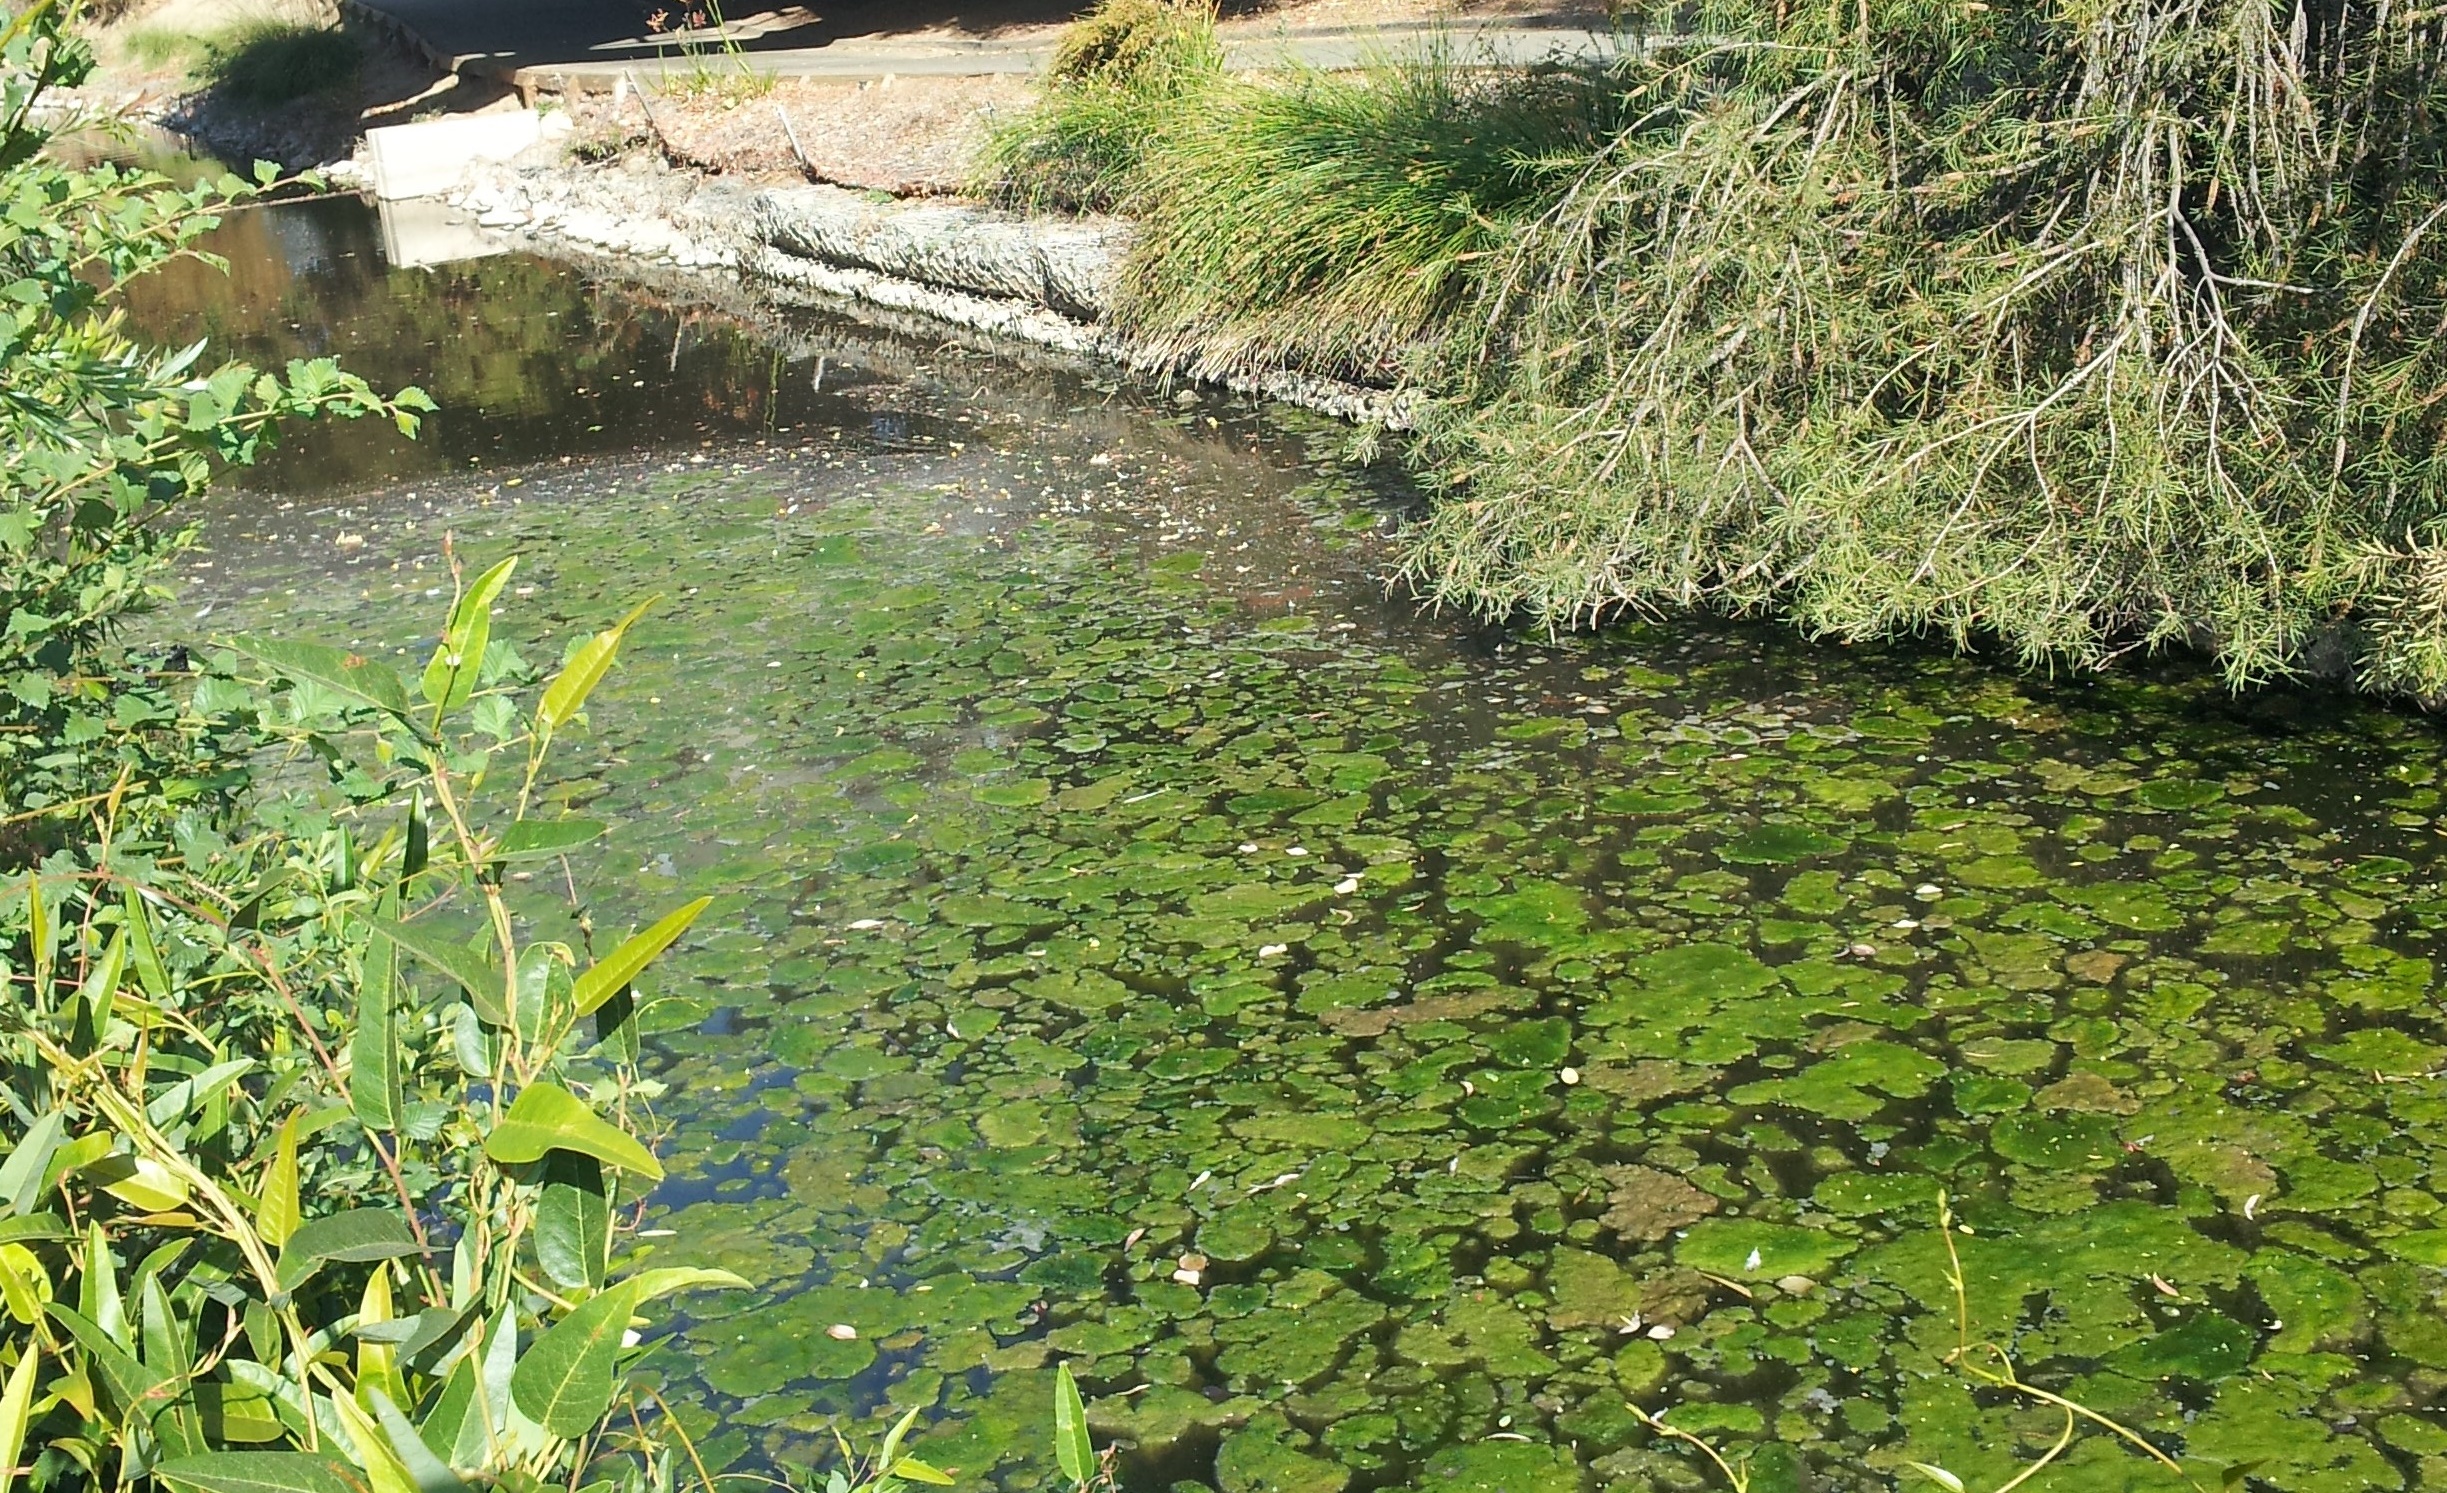 Photo of algae mats on the water prior to Phase 1 project completion